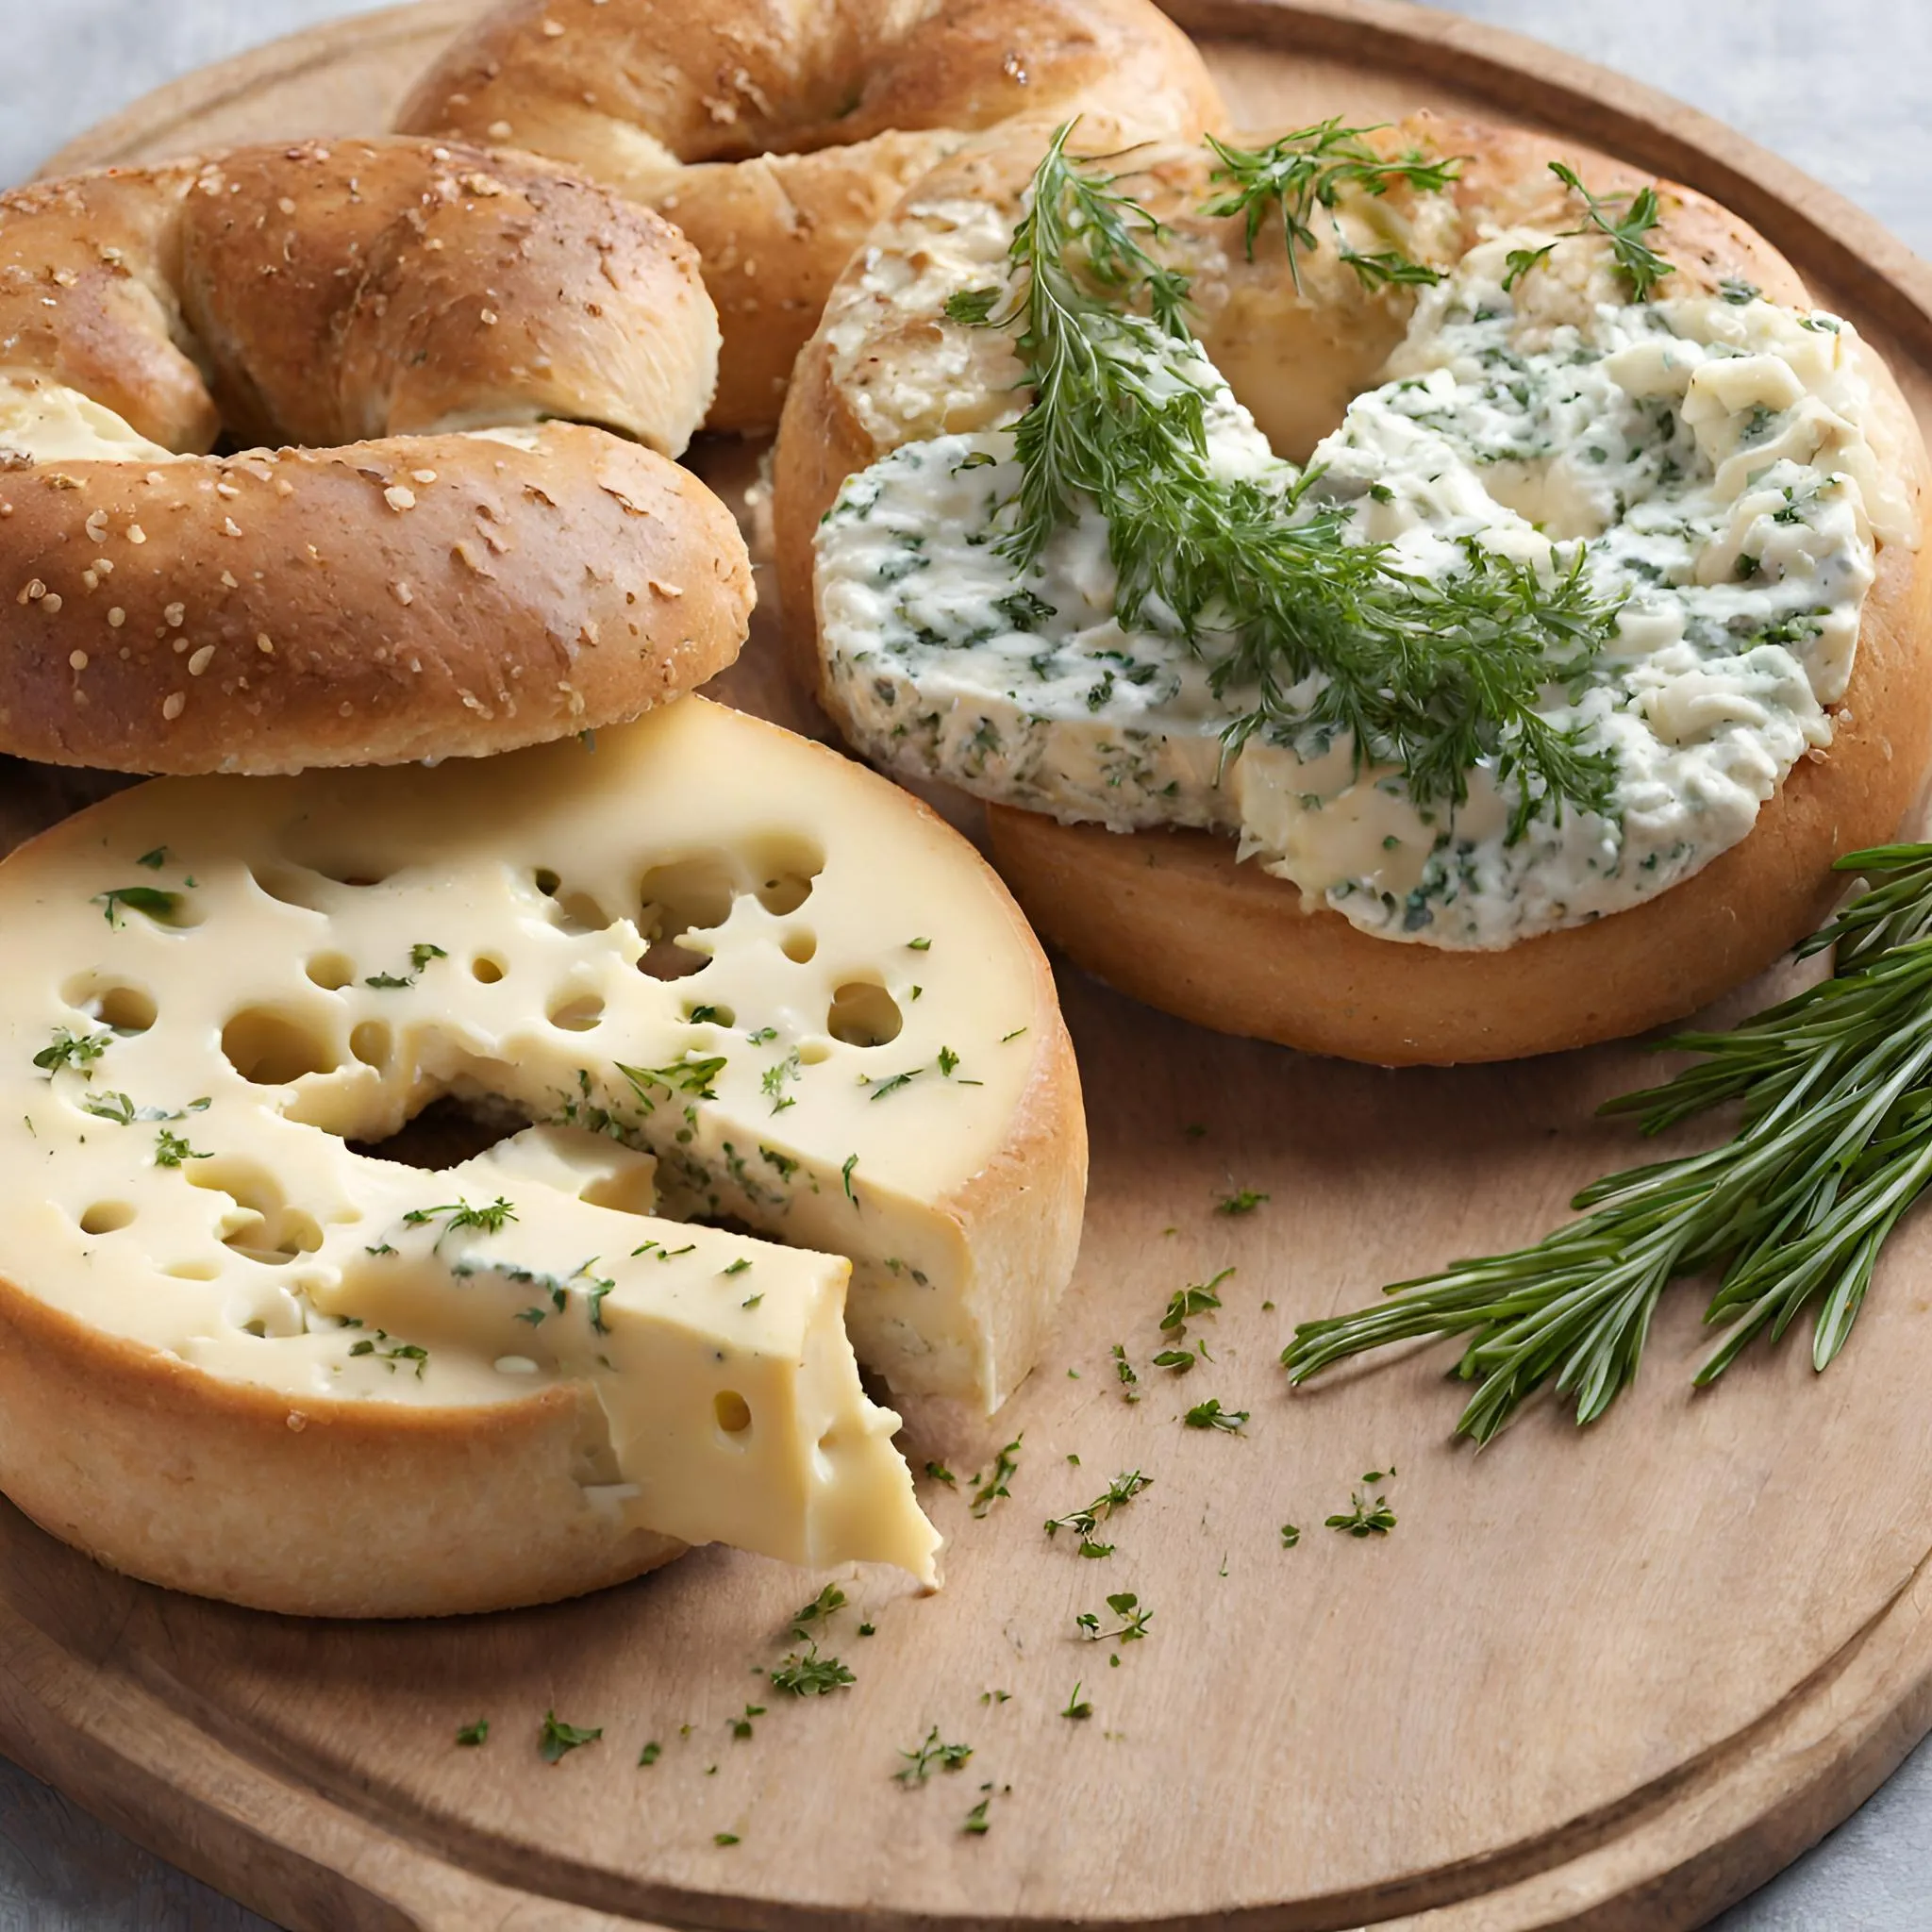 A wooden cutting board topped with a bagel, cream cheese, cheddar cheese, and fresh chives.